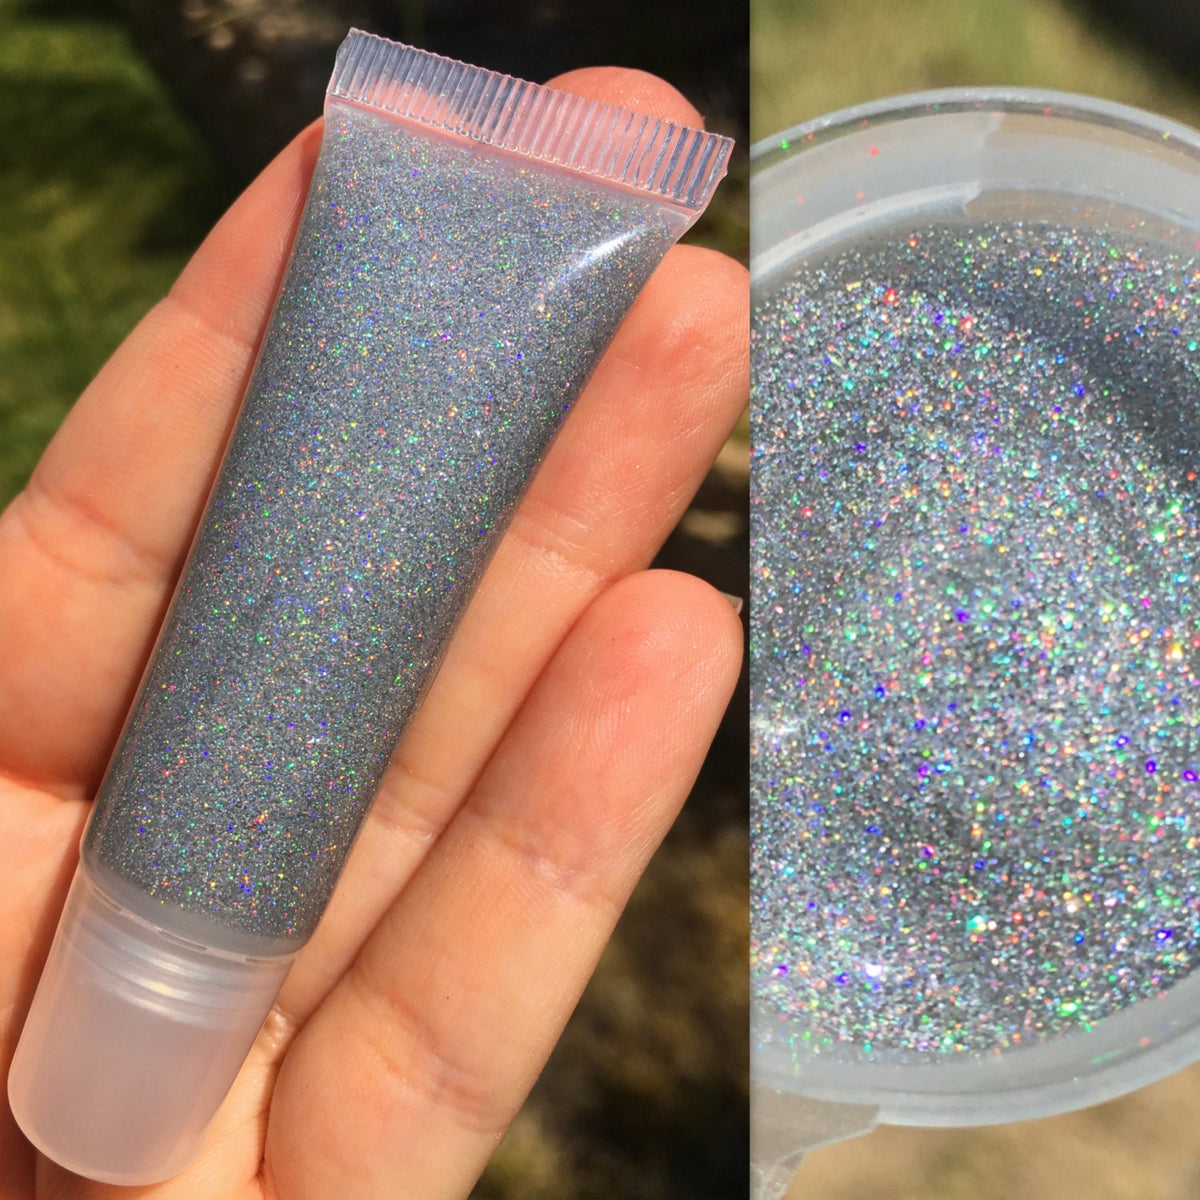 WICKED Holographic Purple Glitter Professional Grade Cosmetic Glitter  Eyeshadow and Eyeliner. Vegan Friendly. 